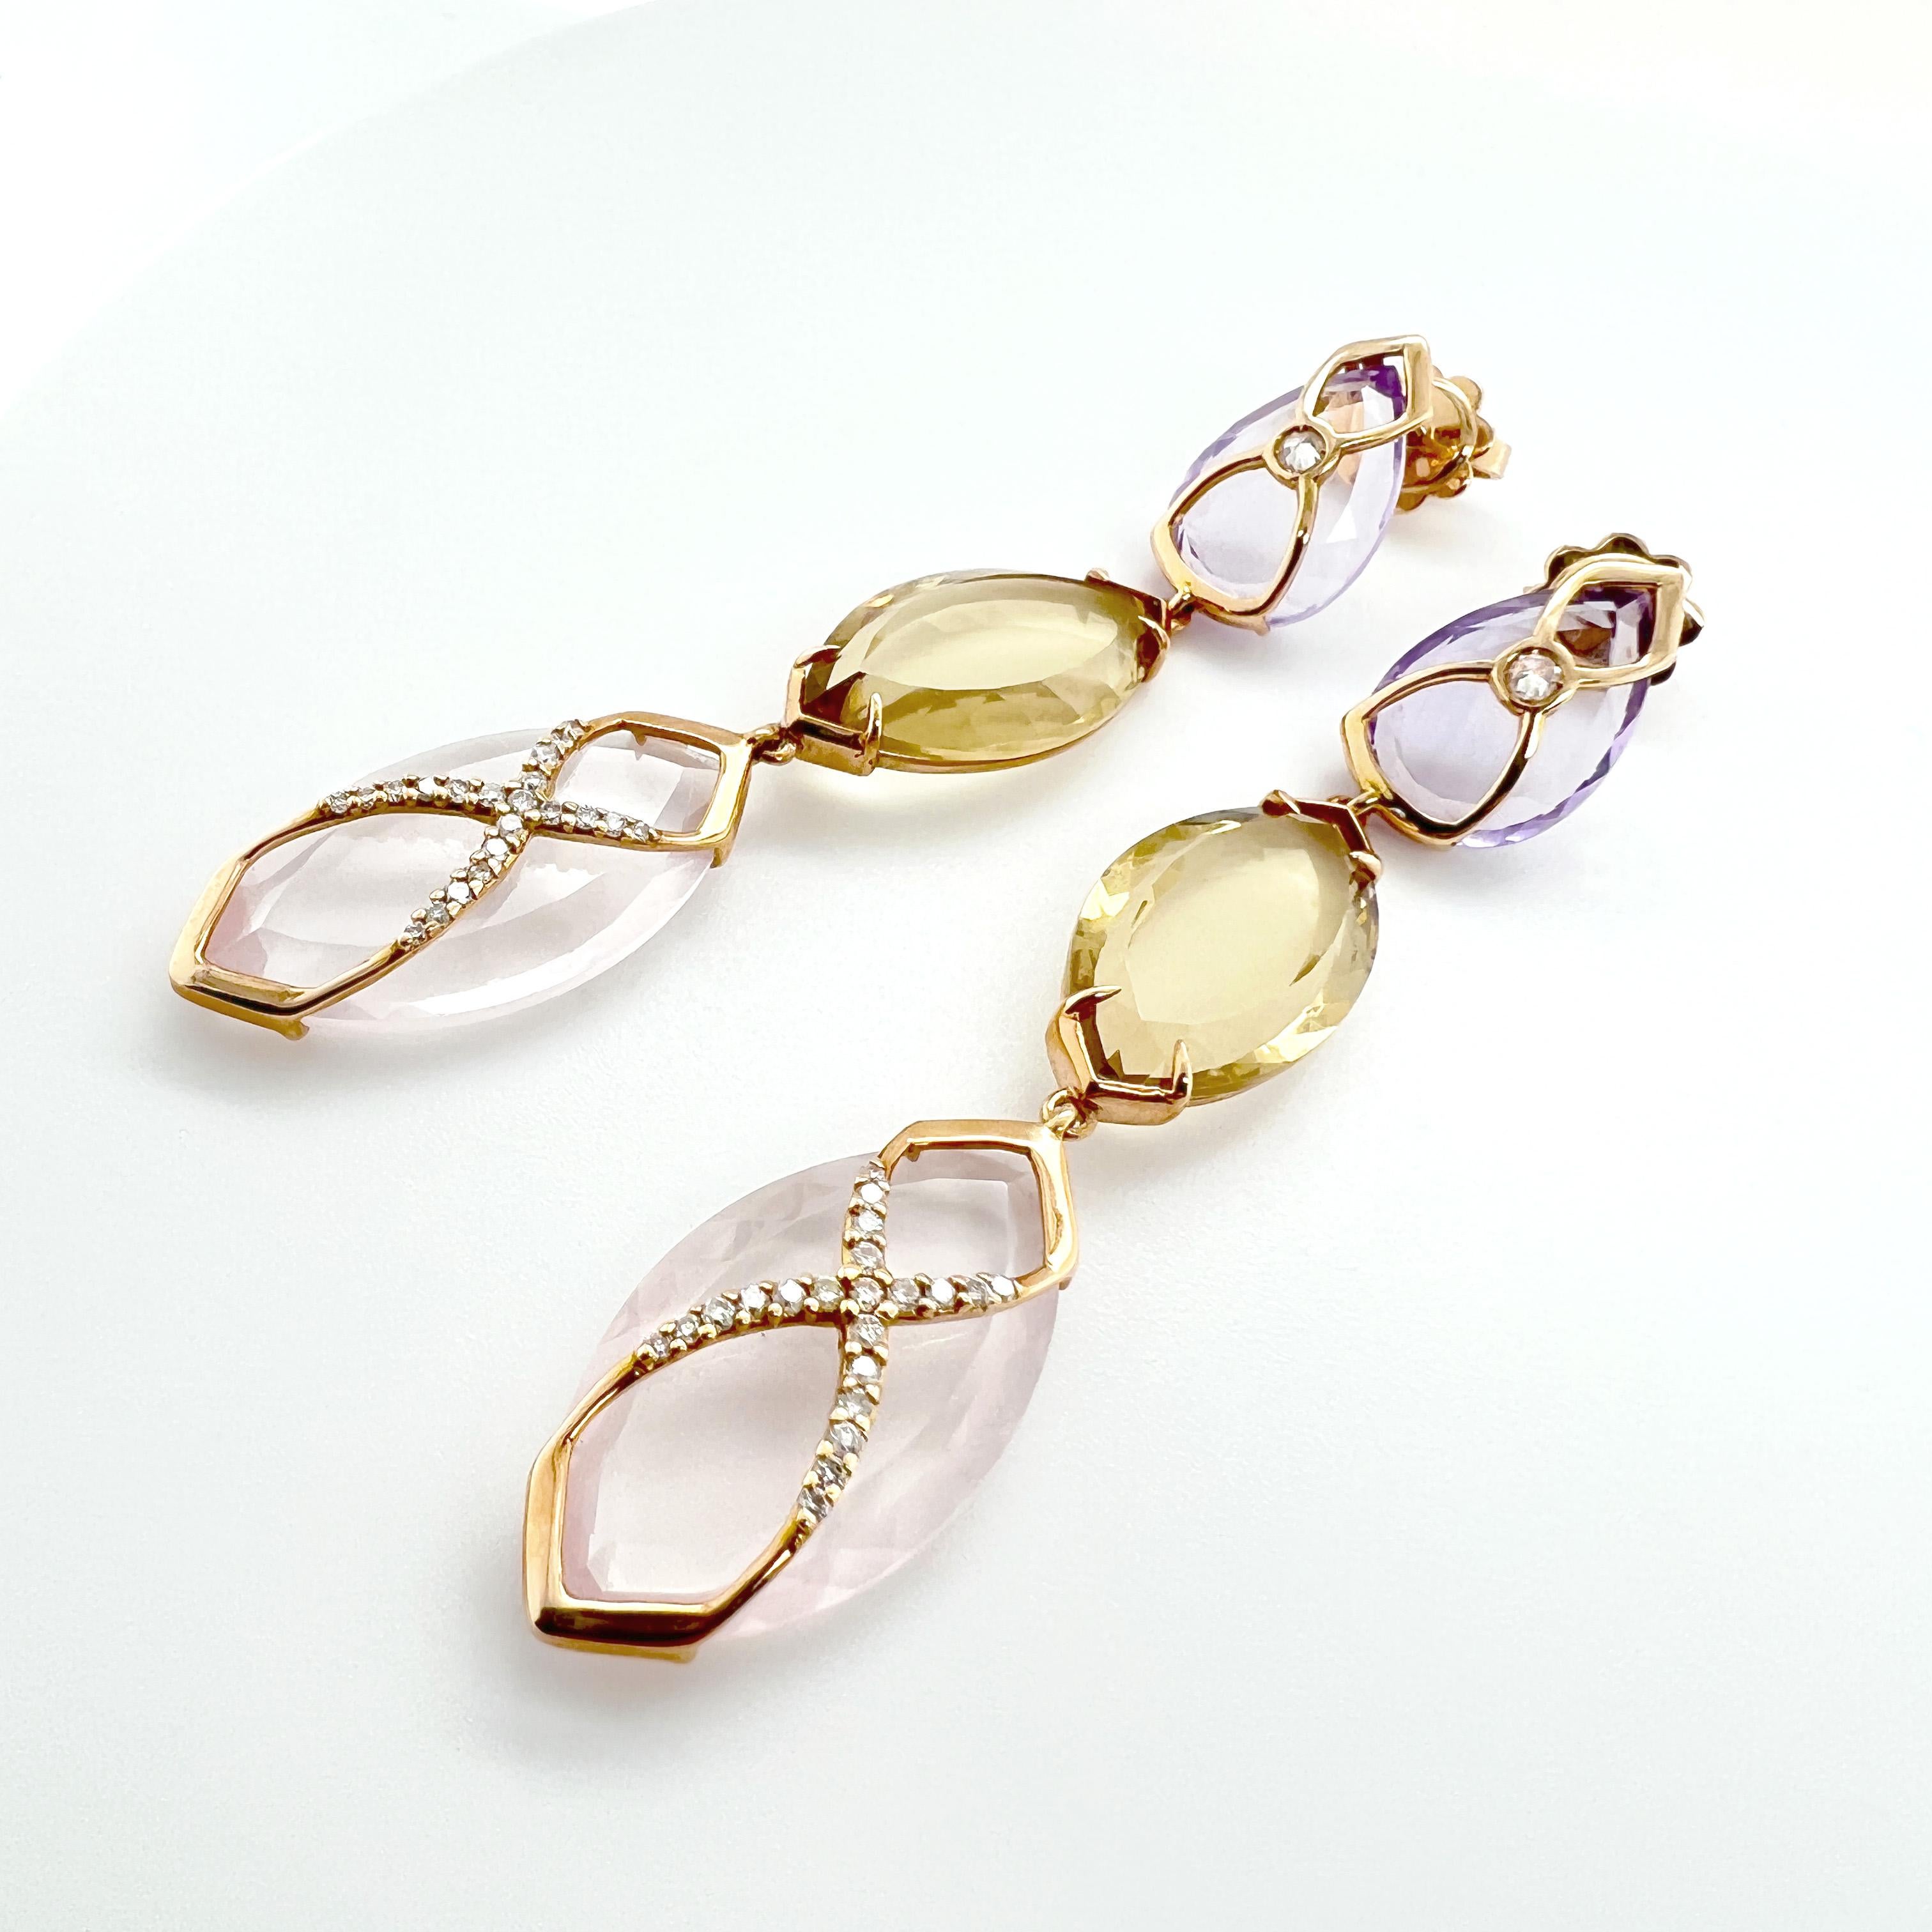 These earrings are a beautiful combination of 18KT gold, diamonds, and colorful gemstones. The design features a drop-shaped amethyst gemstone, a navette-cut lemon quartz, and a navette-cut pink quartz, all delicately arranged in a stunning